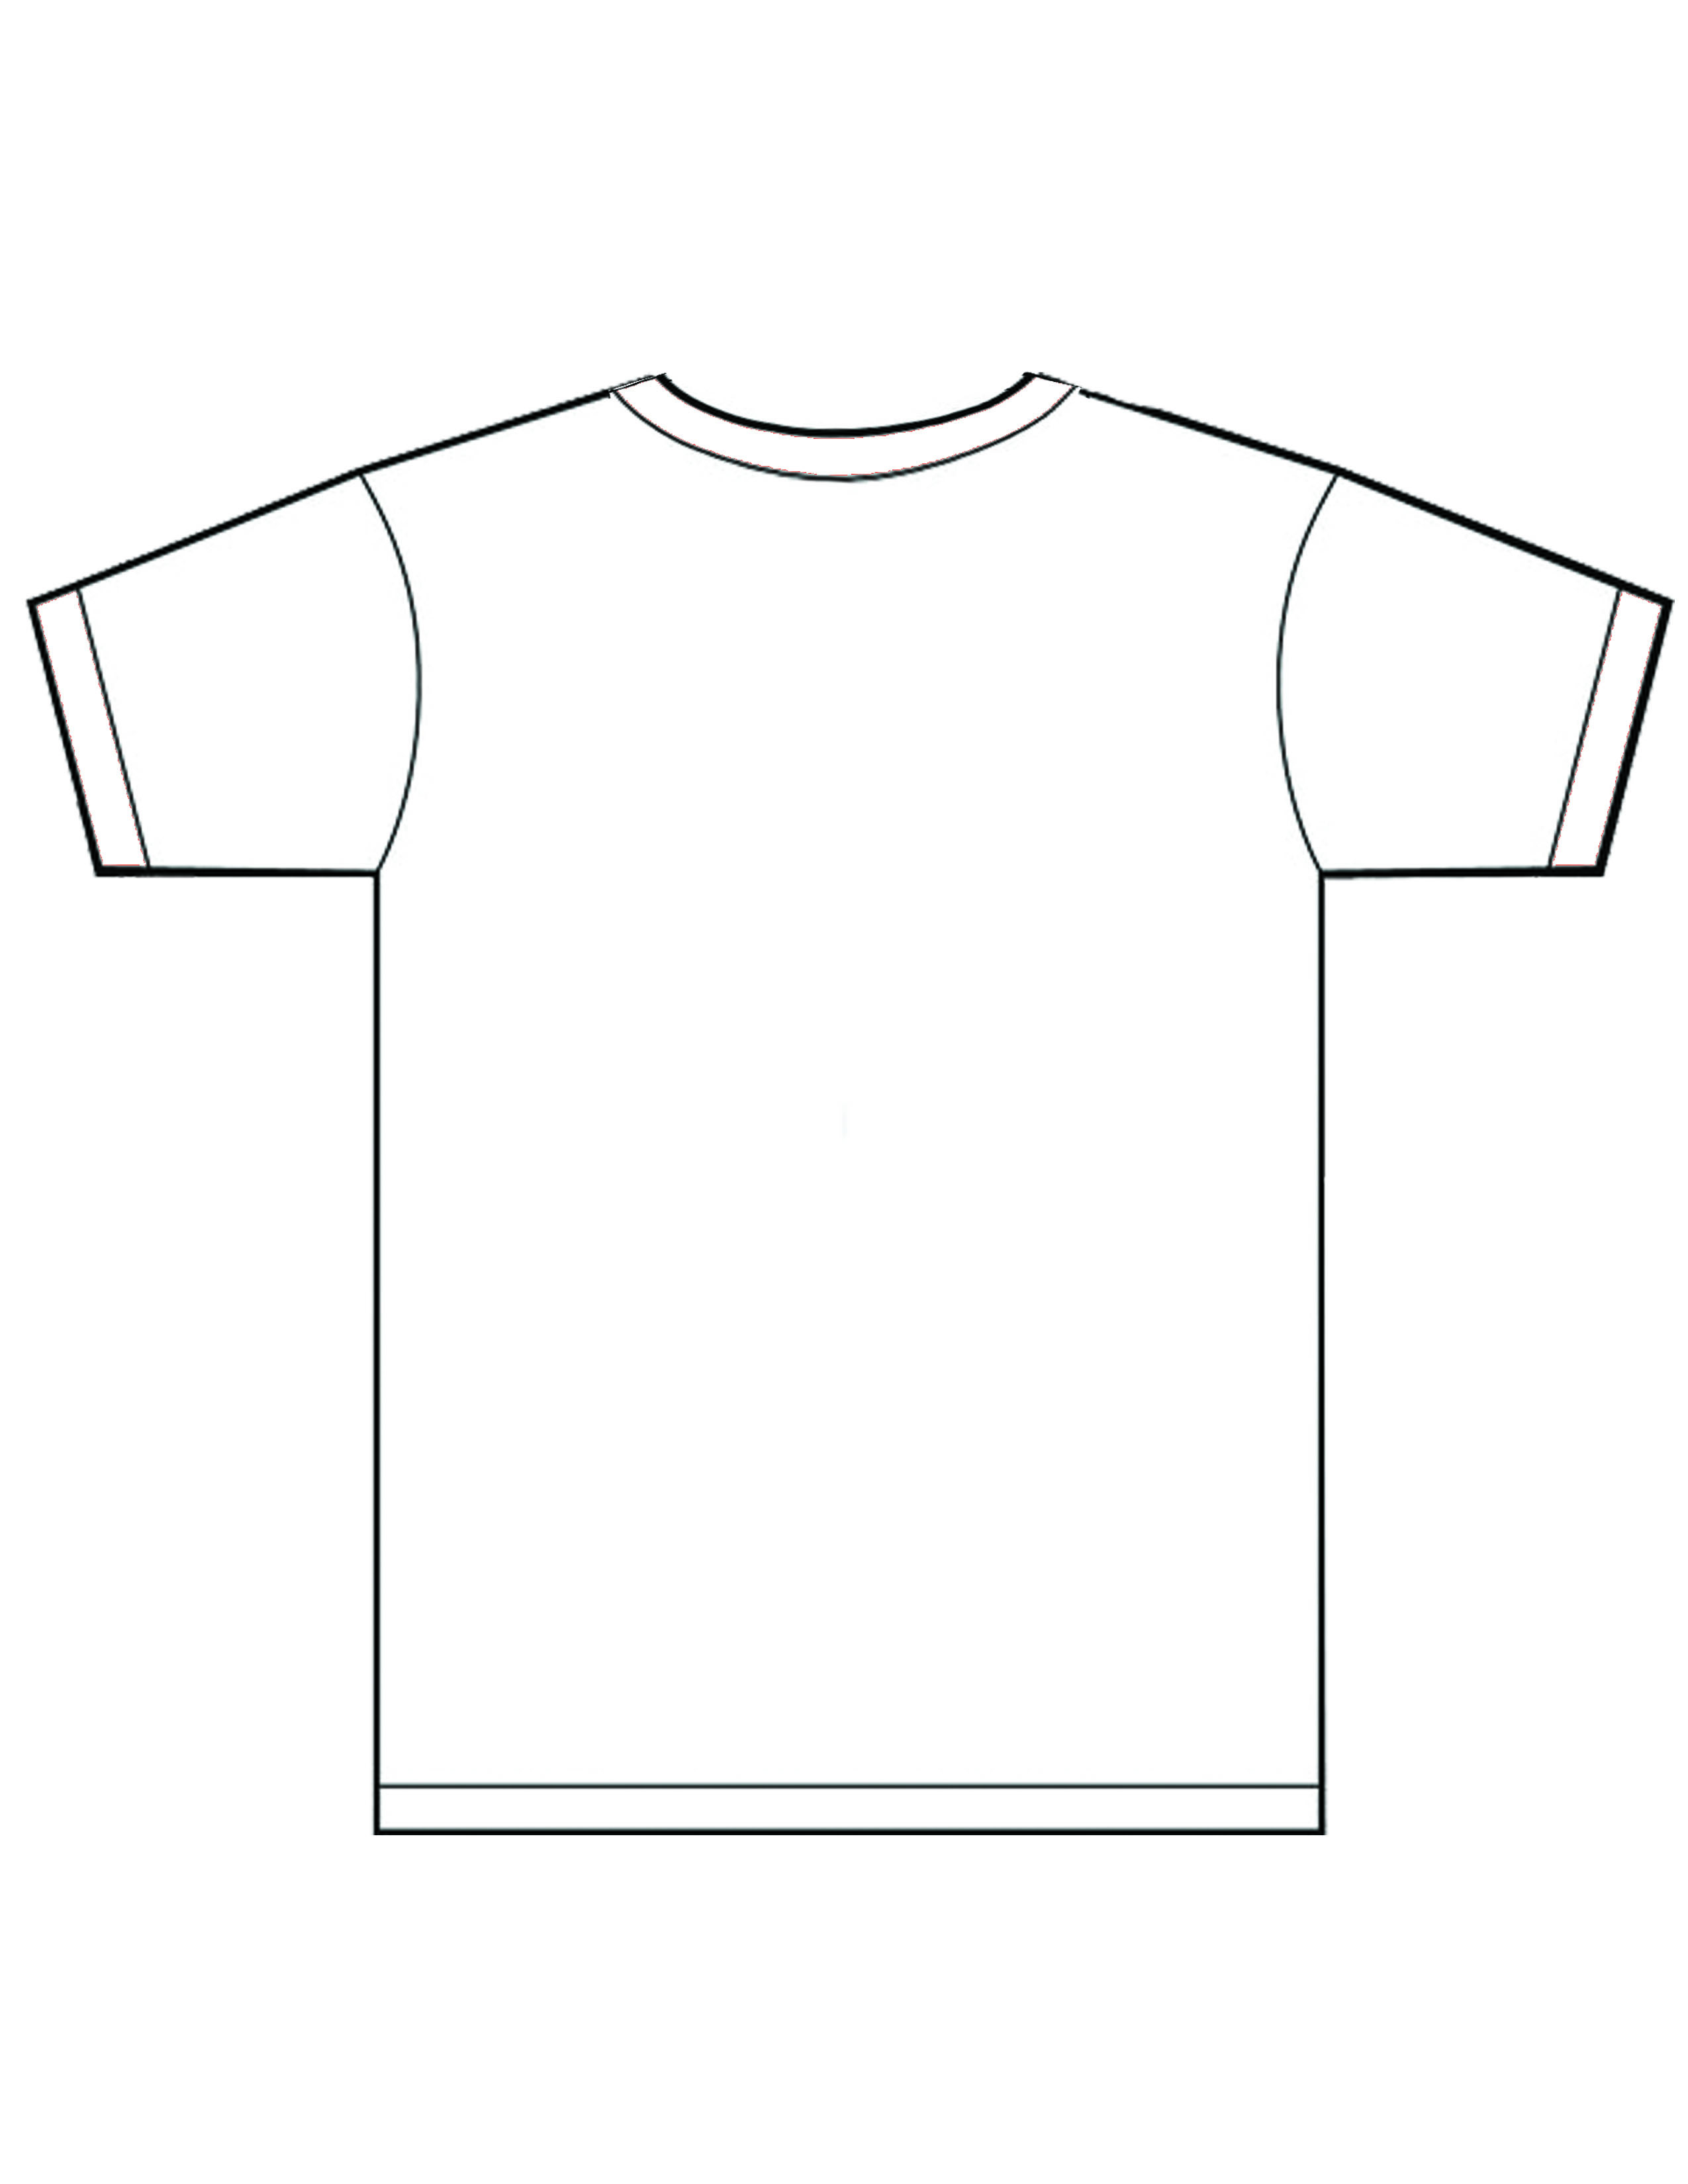 25 T-Shirt Template Front And Back Images - T-Shirt Template Back With Blank Tshirt Template Pdf